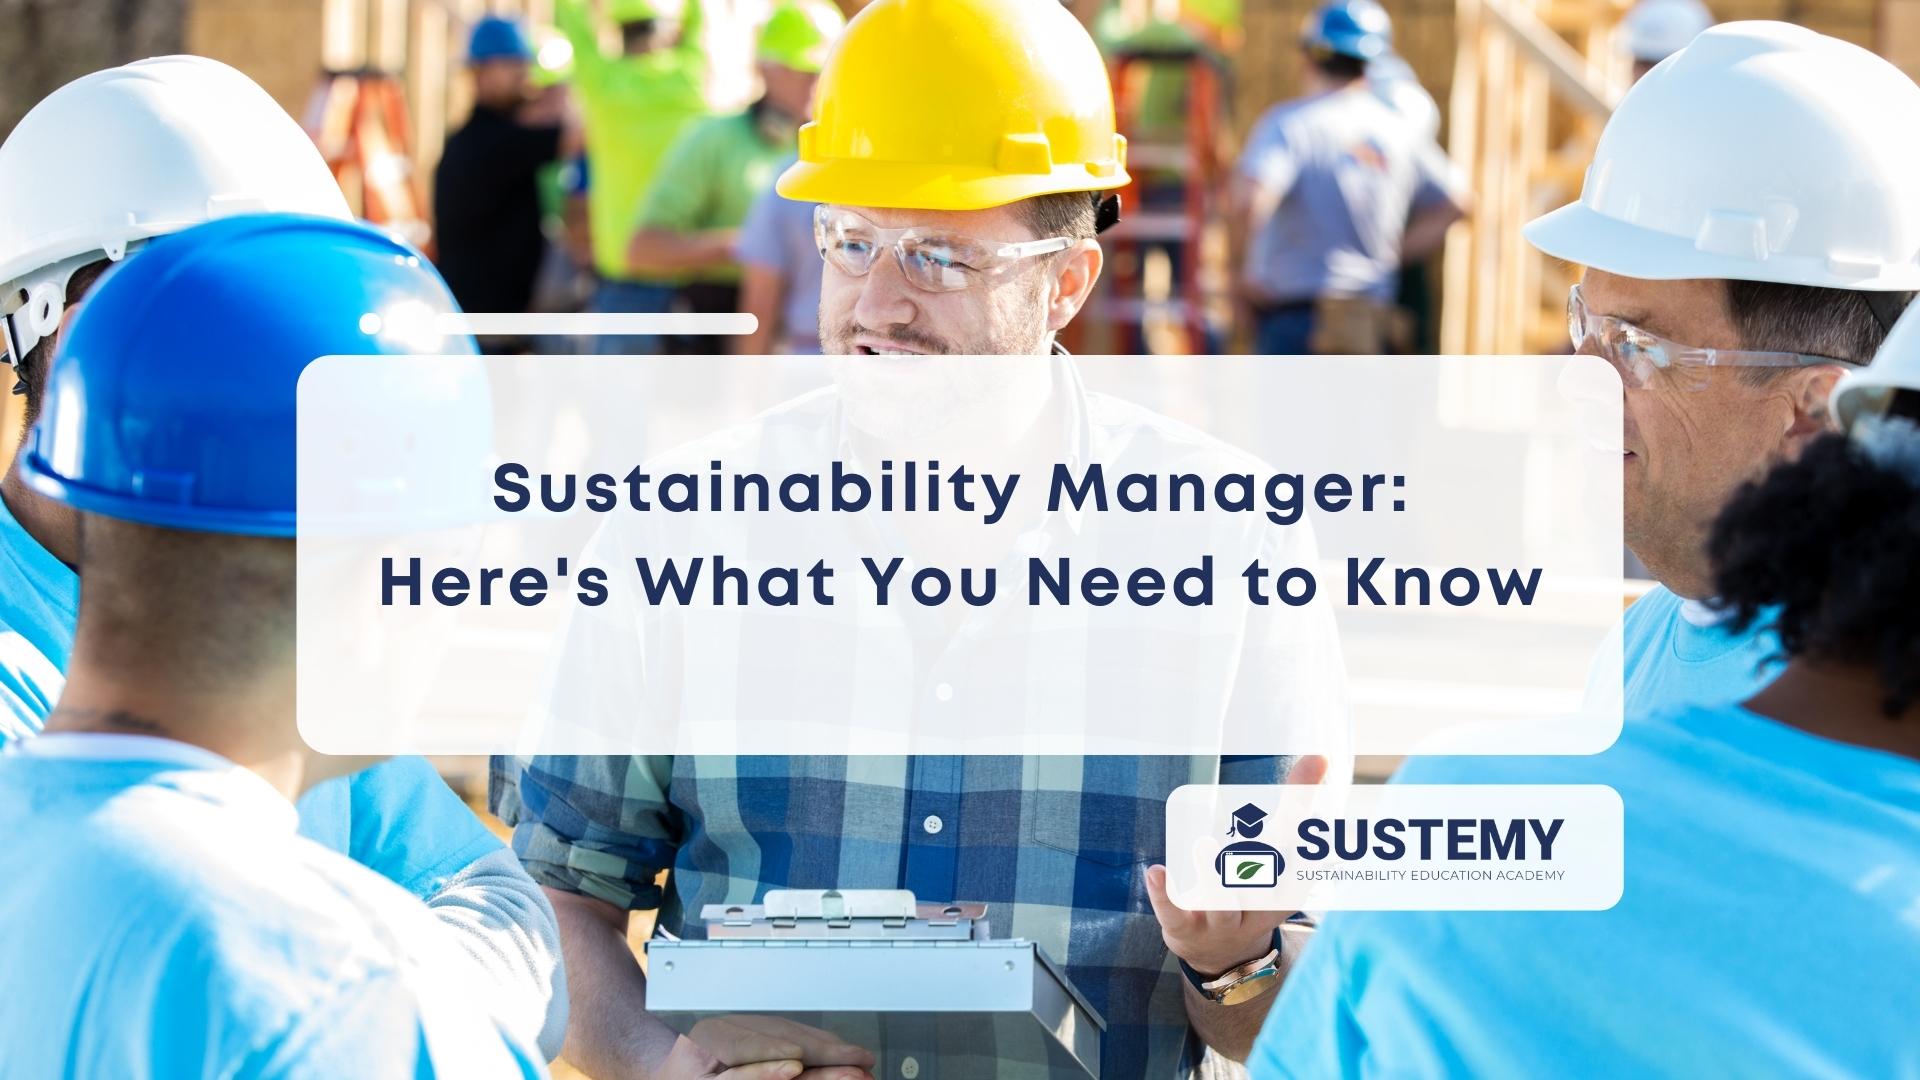 Sustainability managers talking with text overlaid about sustainability manager